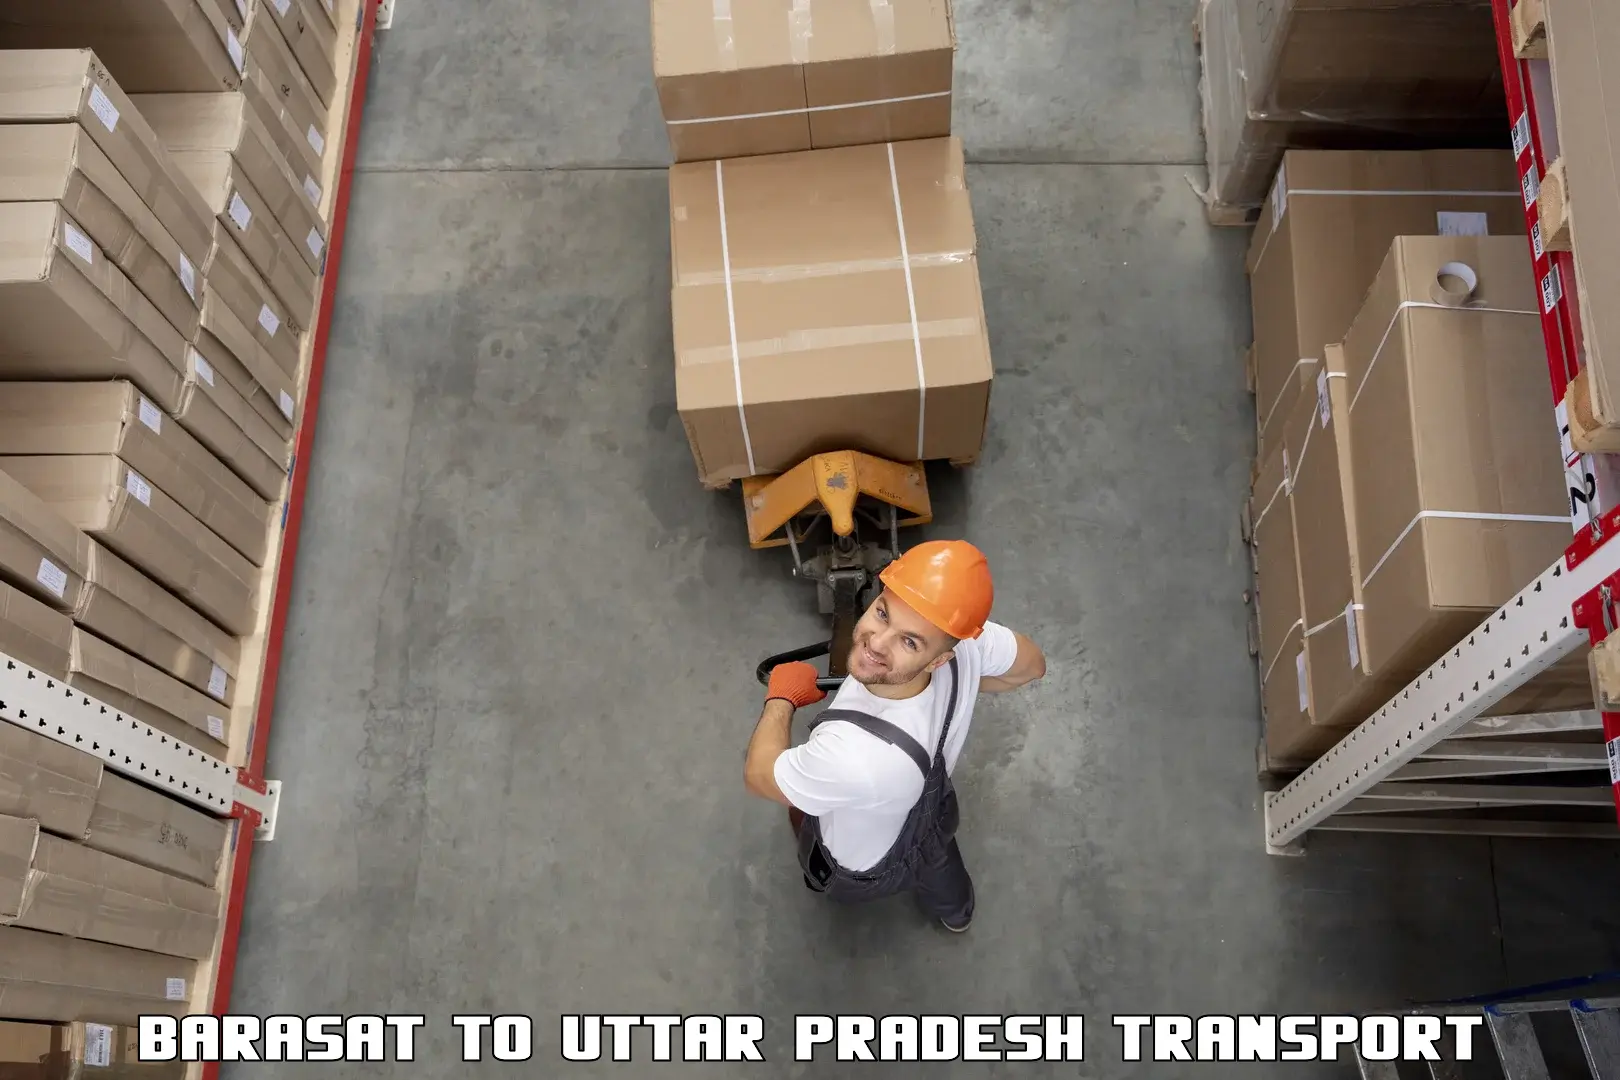 Truck transport companies in India Barasat to Agra